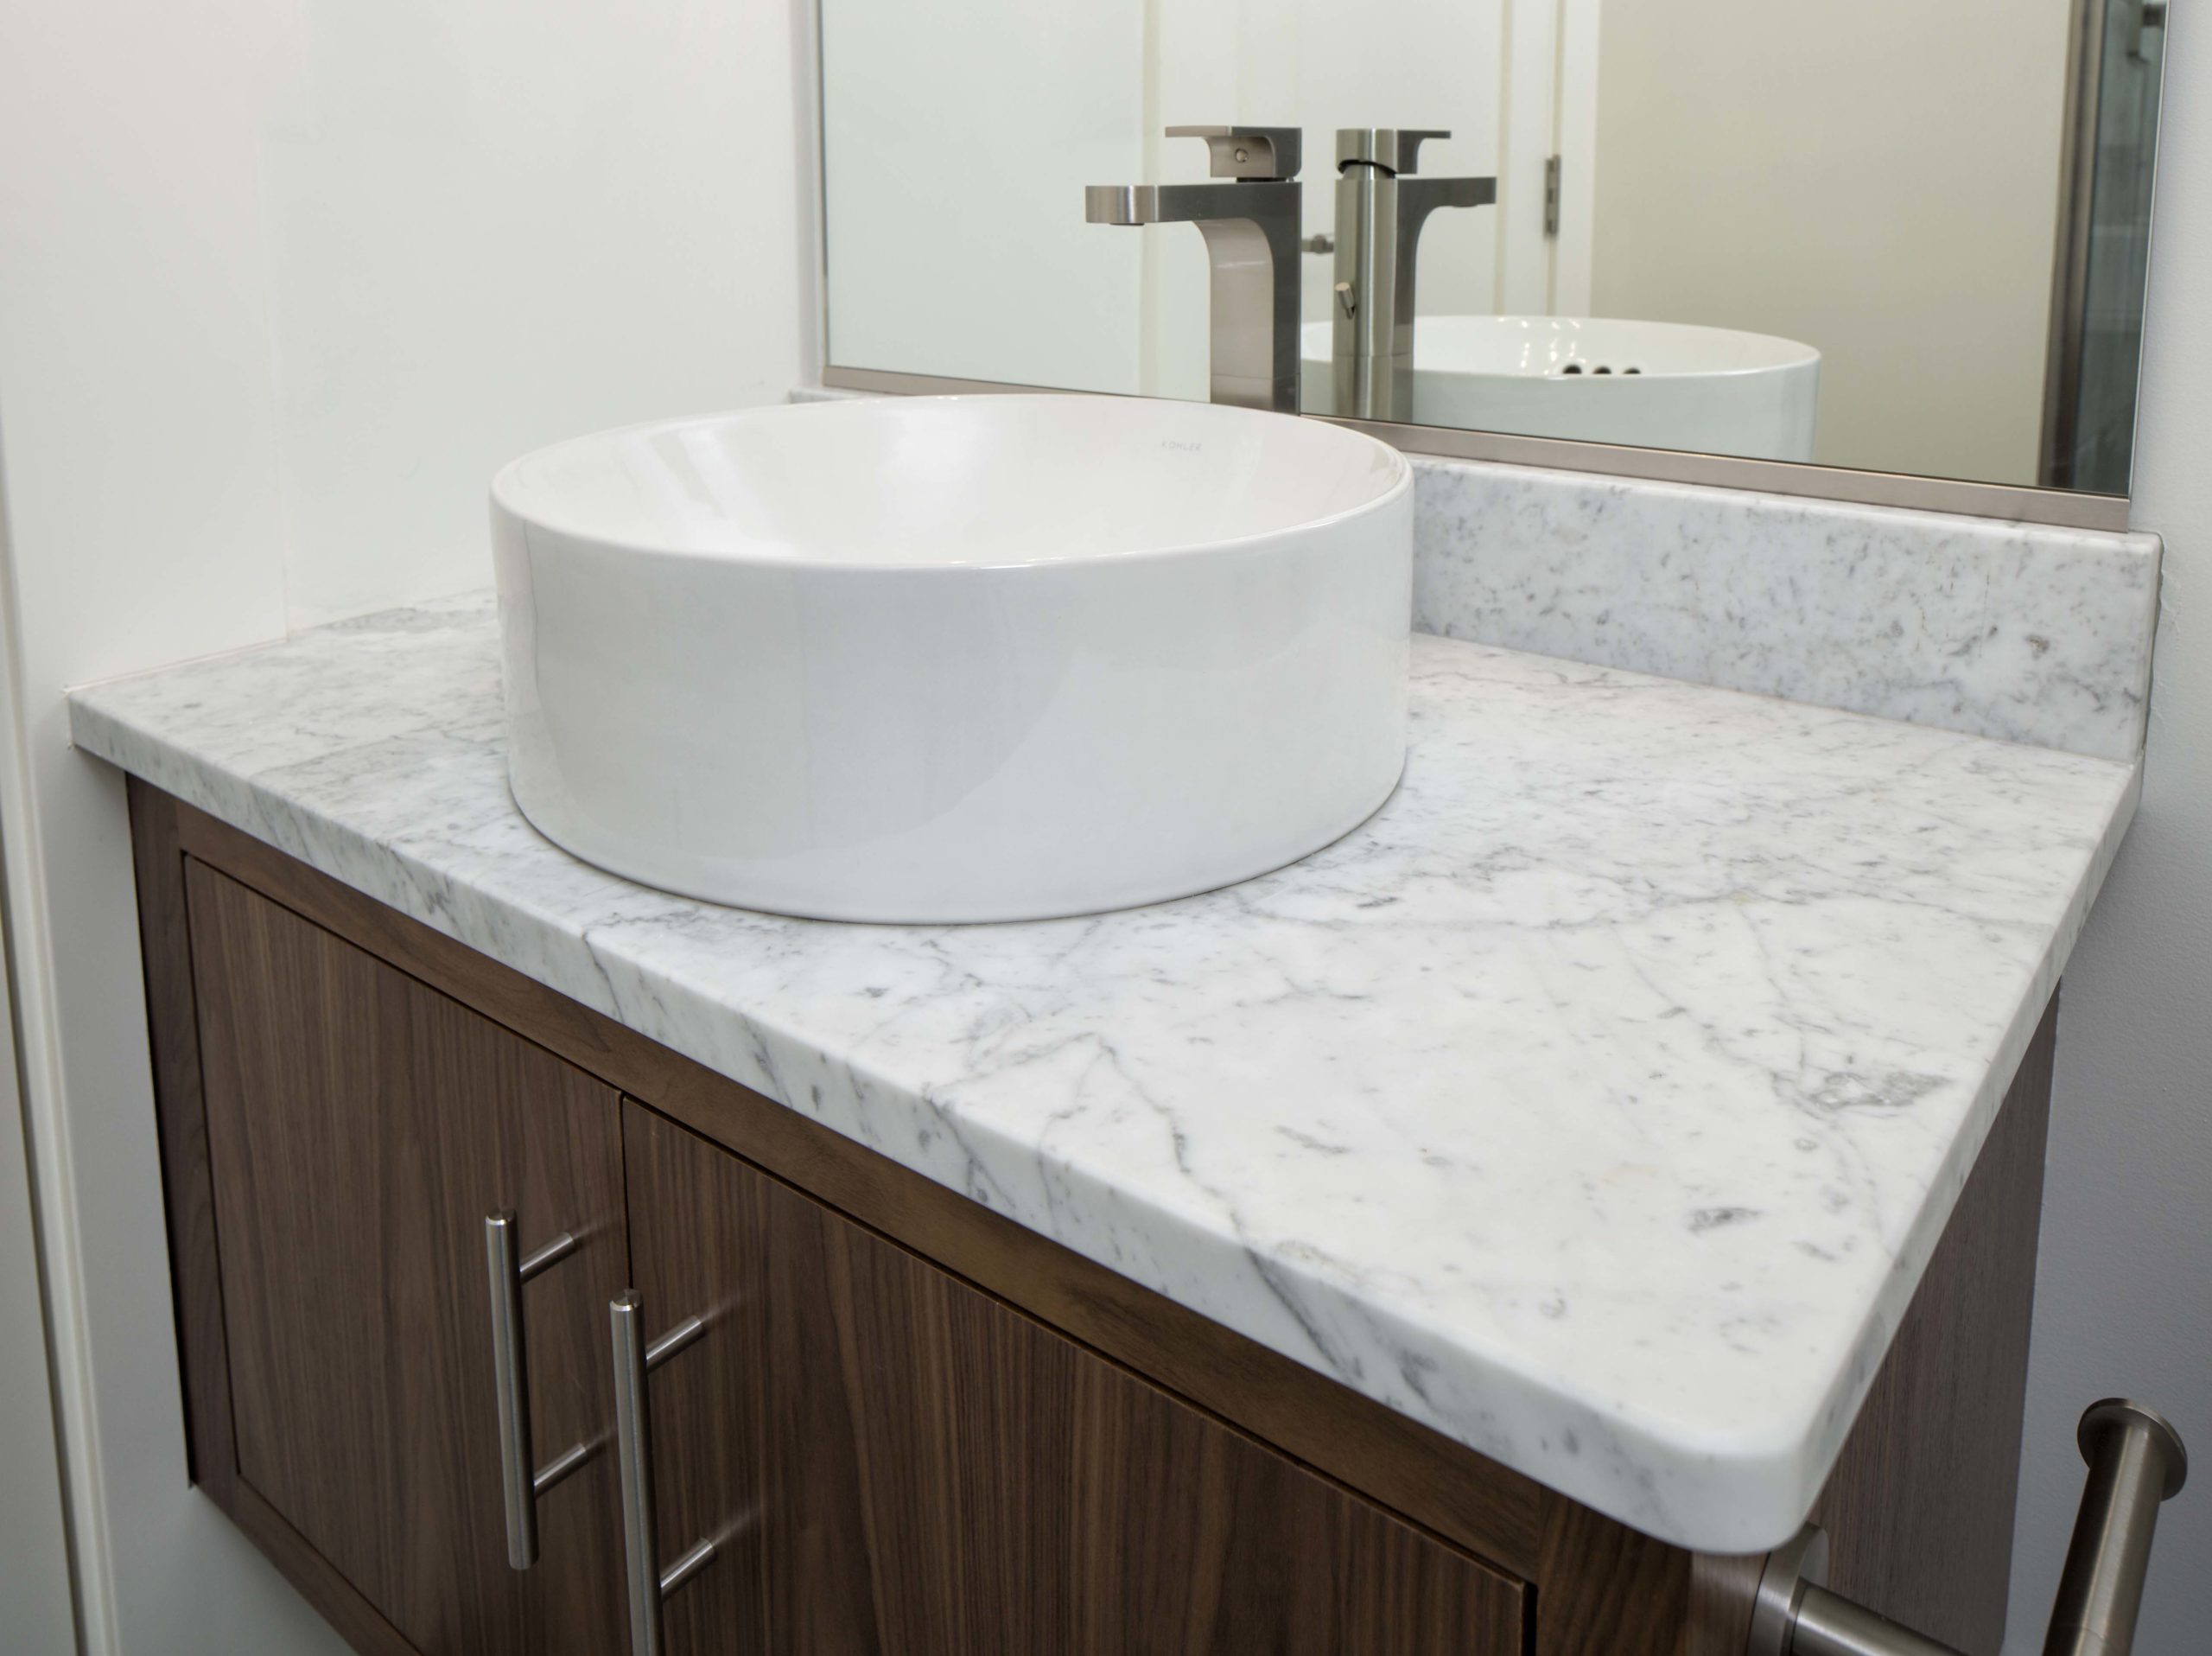 A bathroom with a white sink and marble counter top.